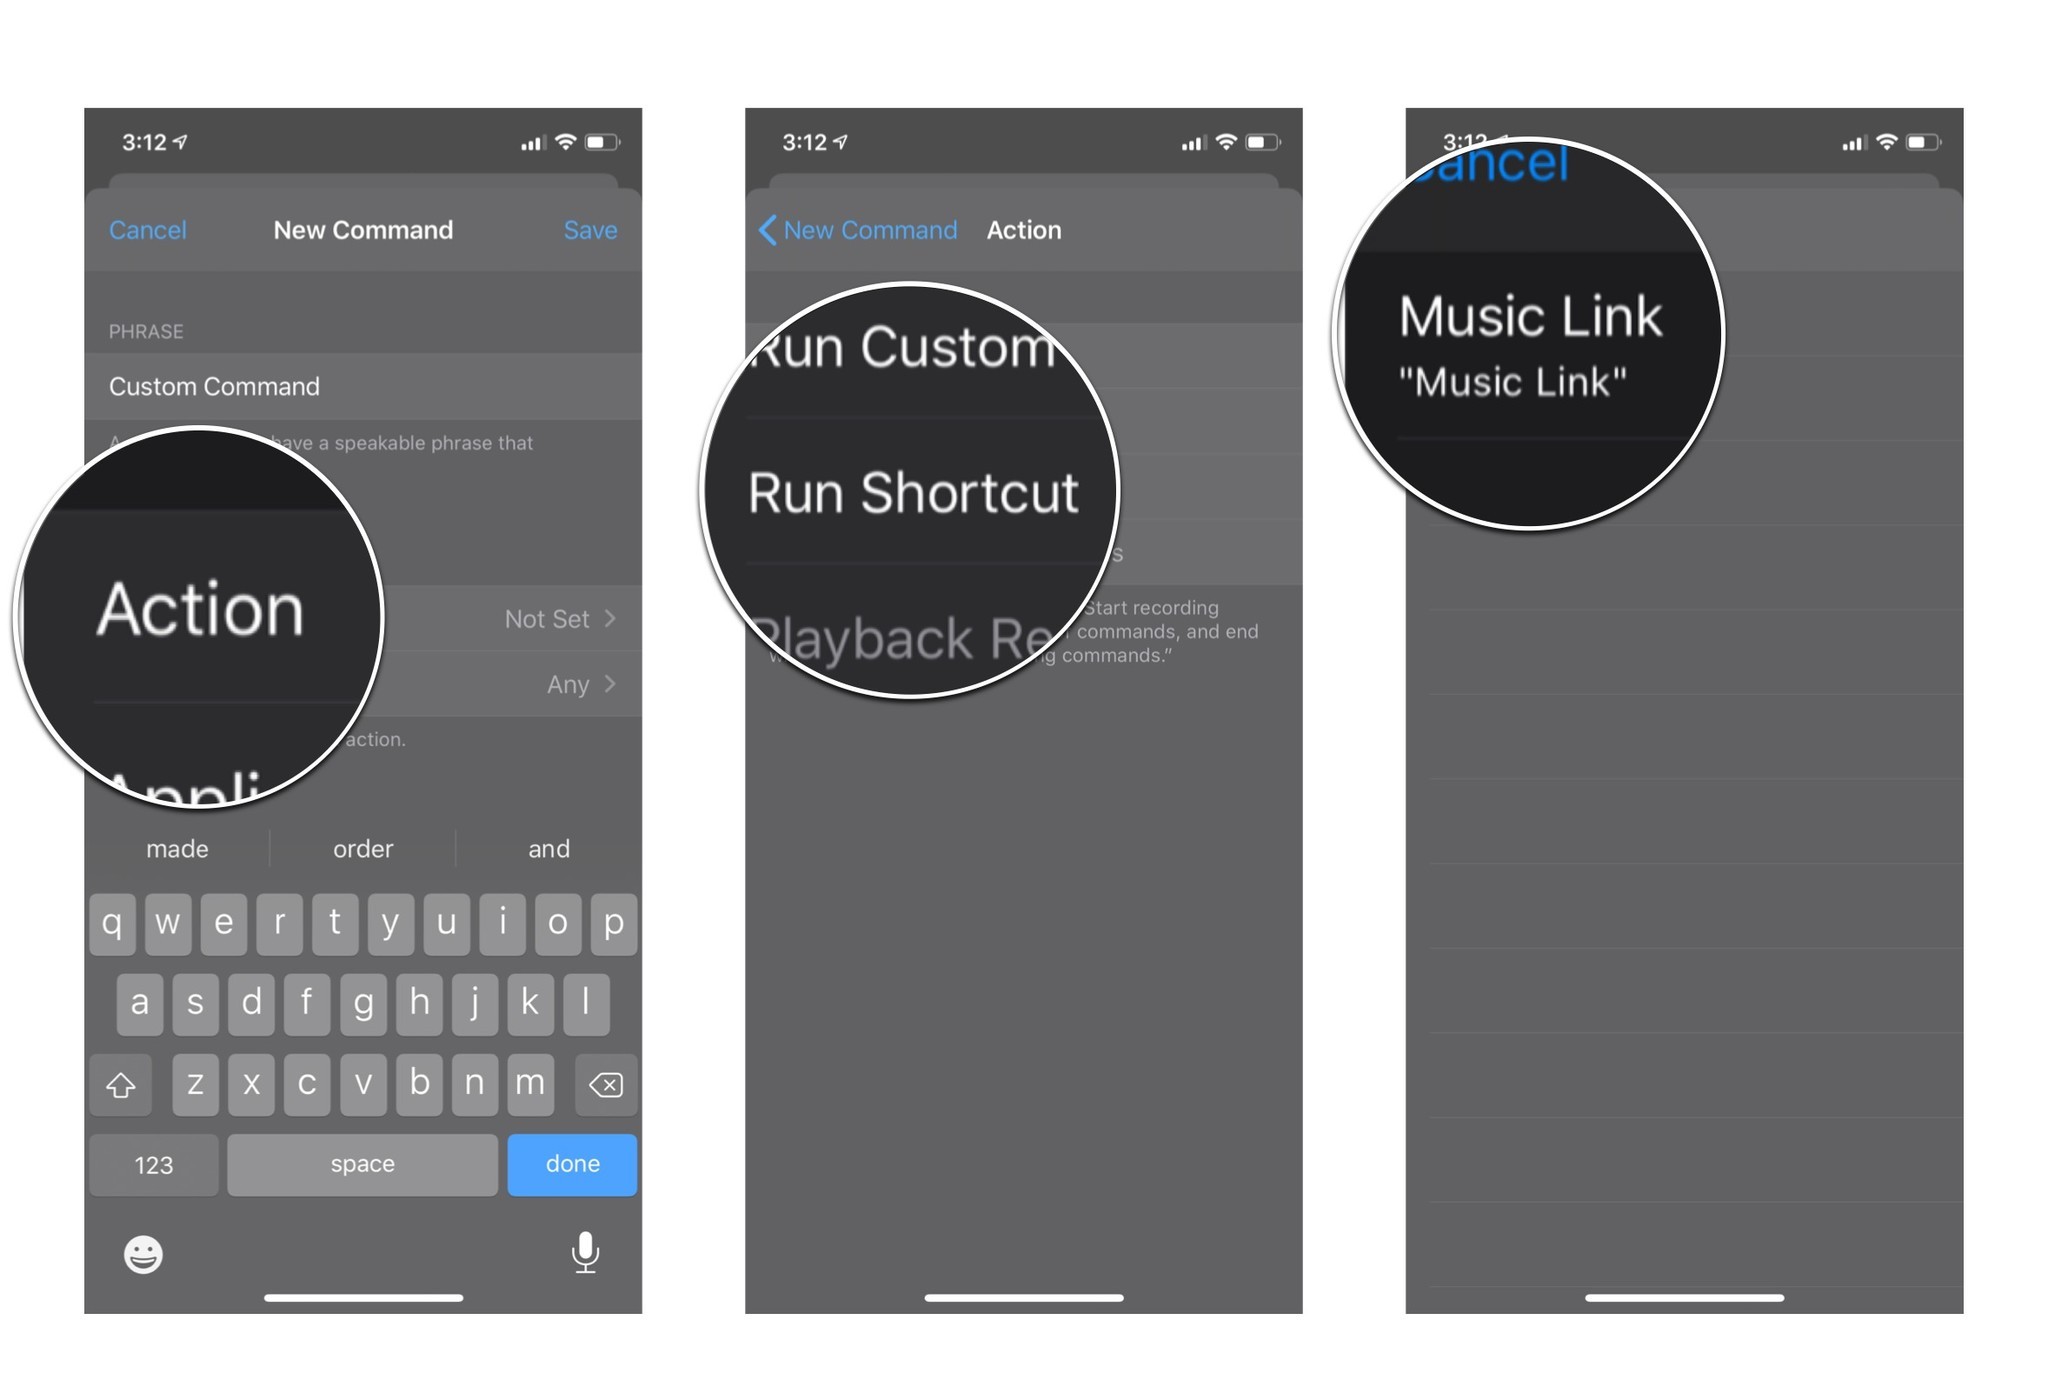 Creating custom shortcut command in Voice Control: Tap Action, tap run shortcut, and then tap the shortcut you want.